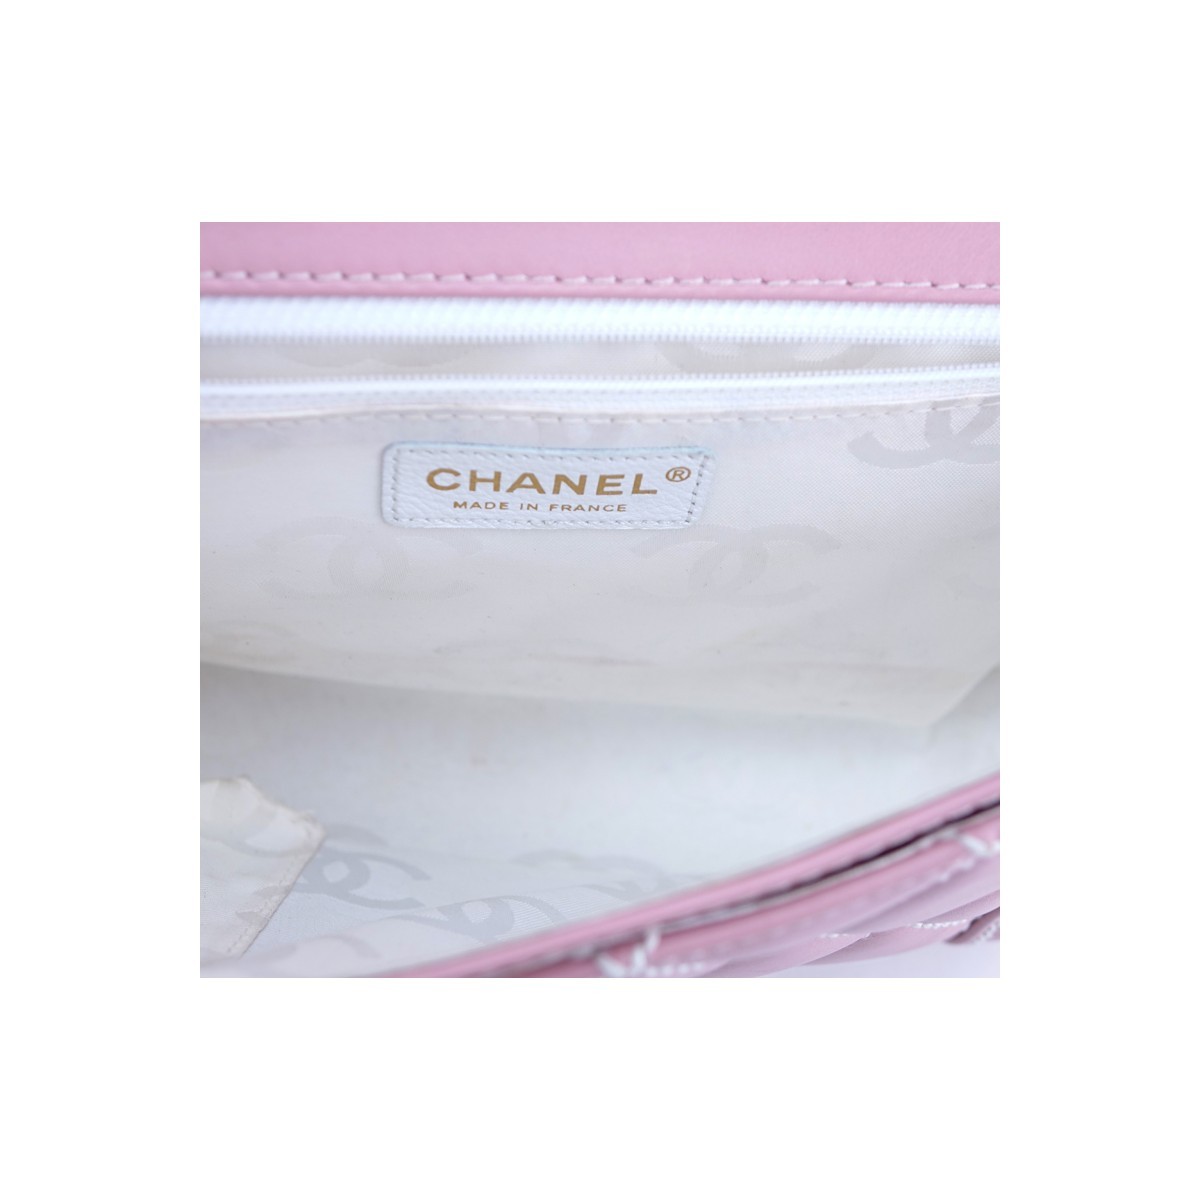 Chanel Light Pink Thick Quilted Leather Top Handle Rectangular Bag. Gold tone hardware, the interior of white monogram fabric with zippered and patch pockets.